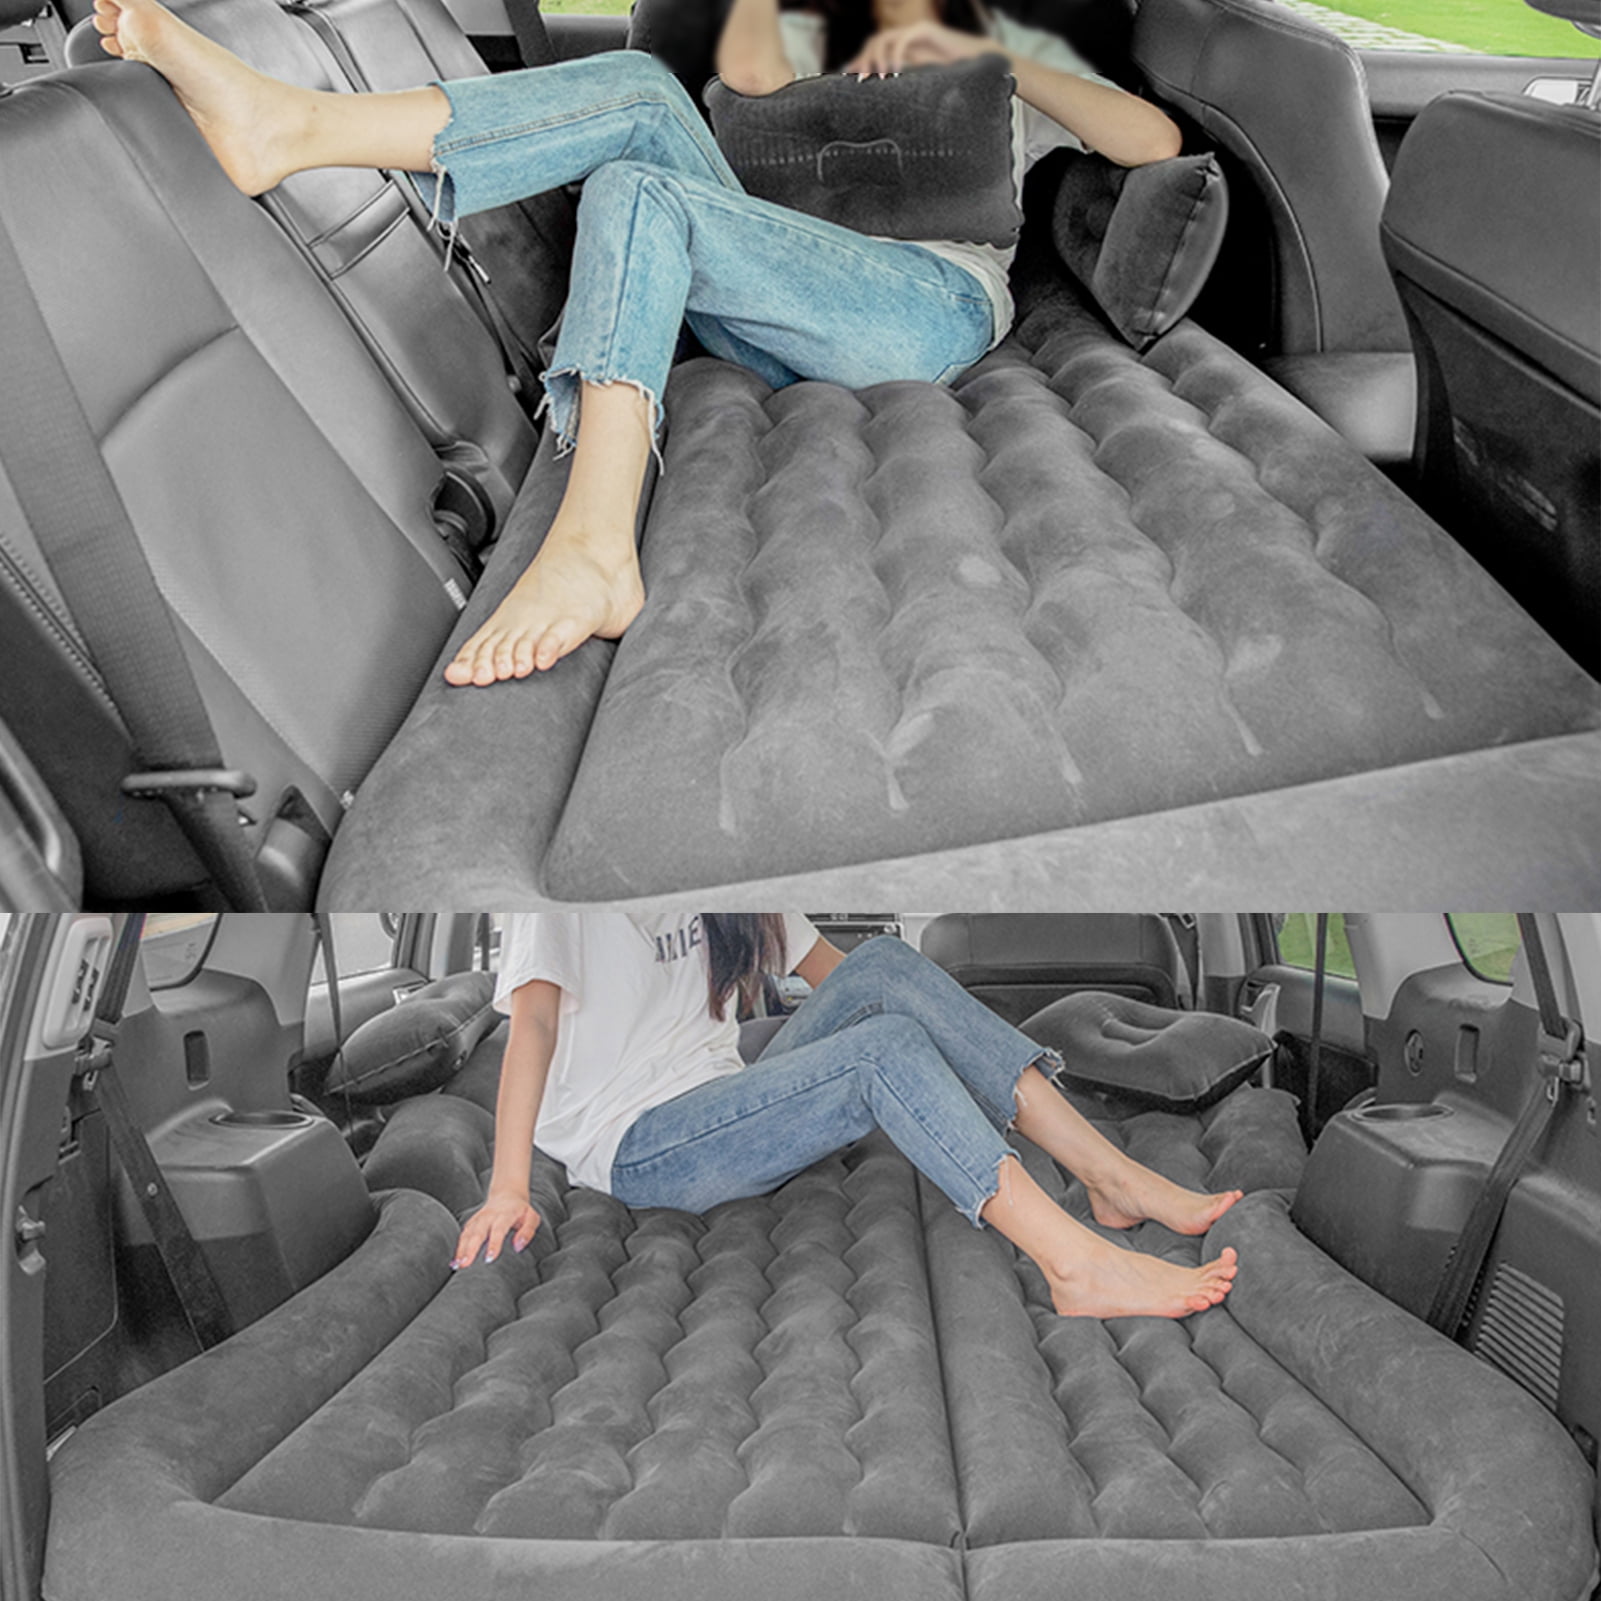 Brrnoo Car Air Mattress Vehicle Inflatable Thickened Travel Bed Sleeping  Pad Camping Accessory 